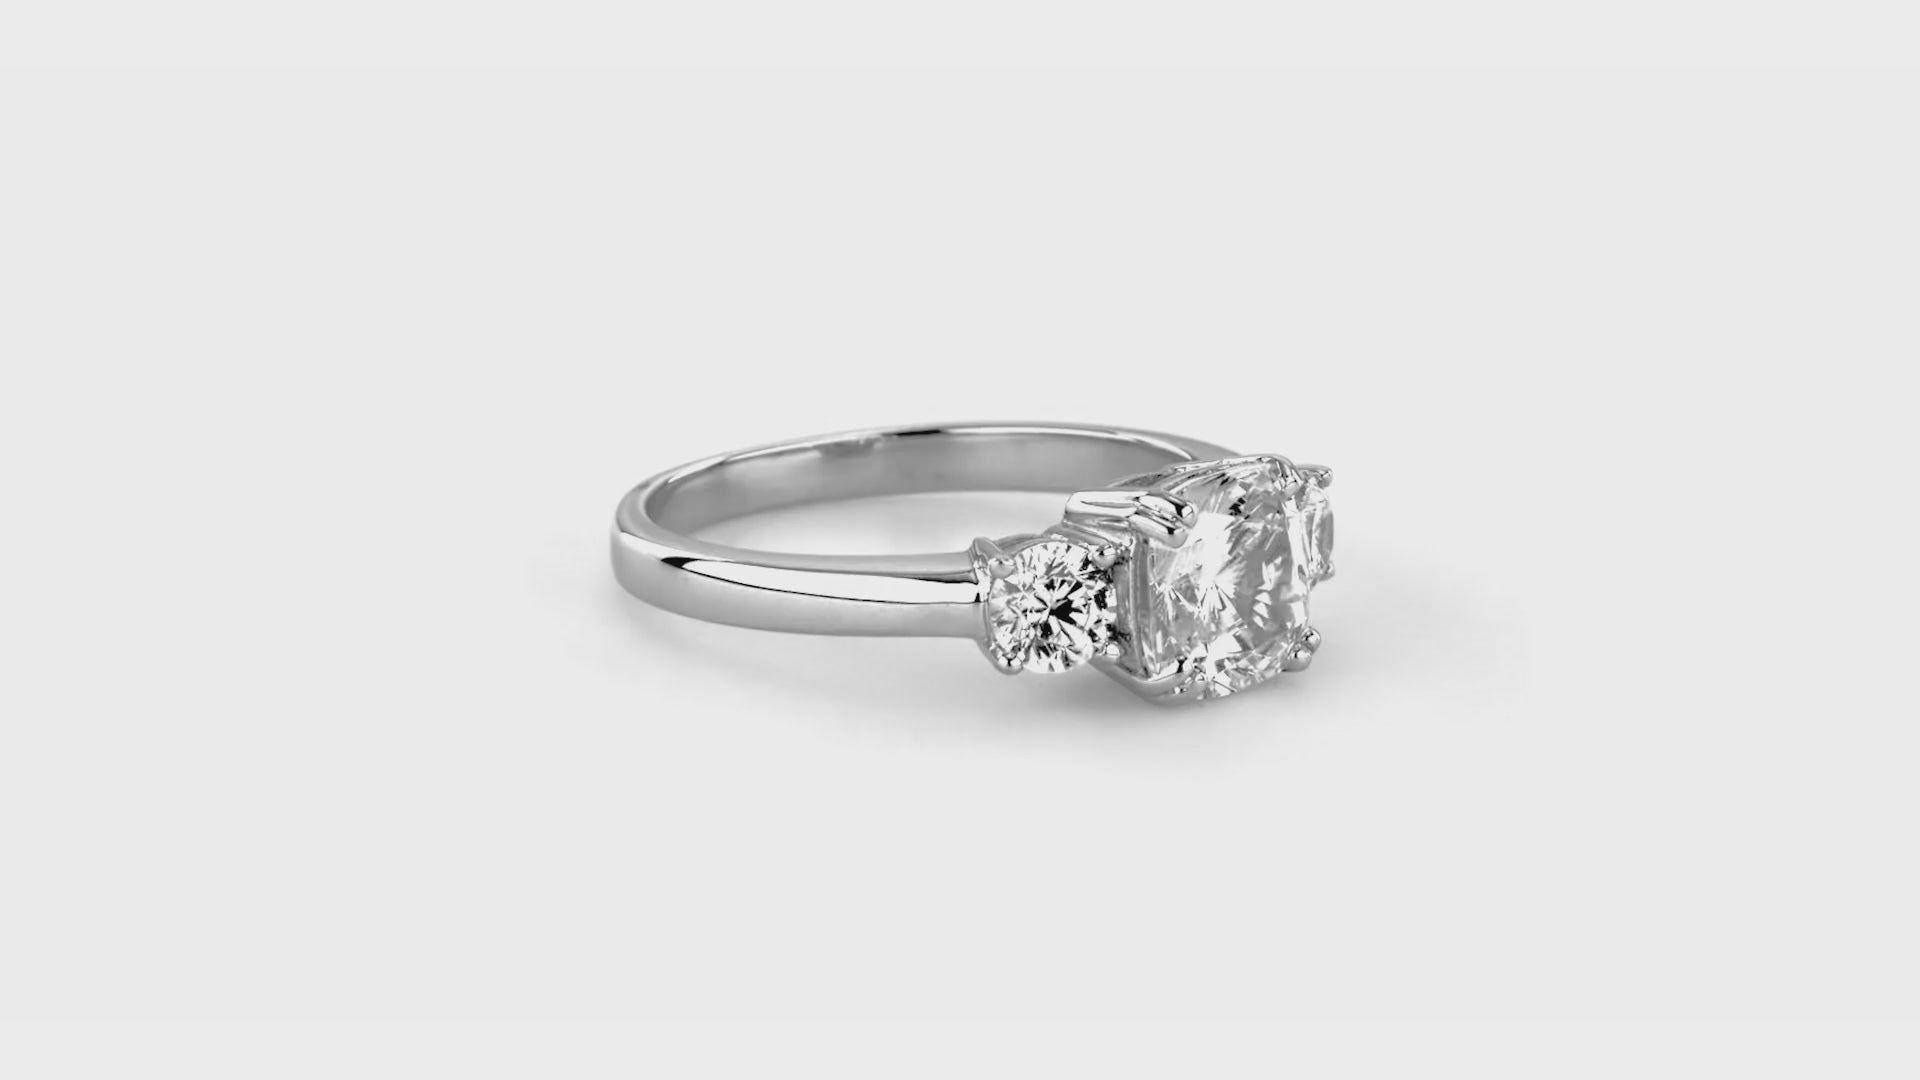 Video Contains 3-Stone Cushion CZ Ring in Sterling Silver. Style Number R1197-01